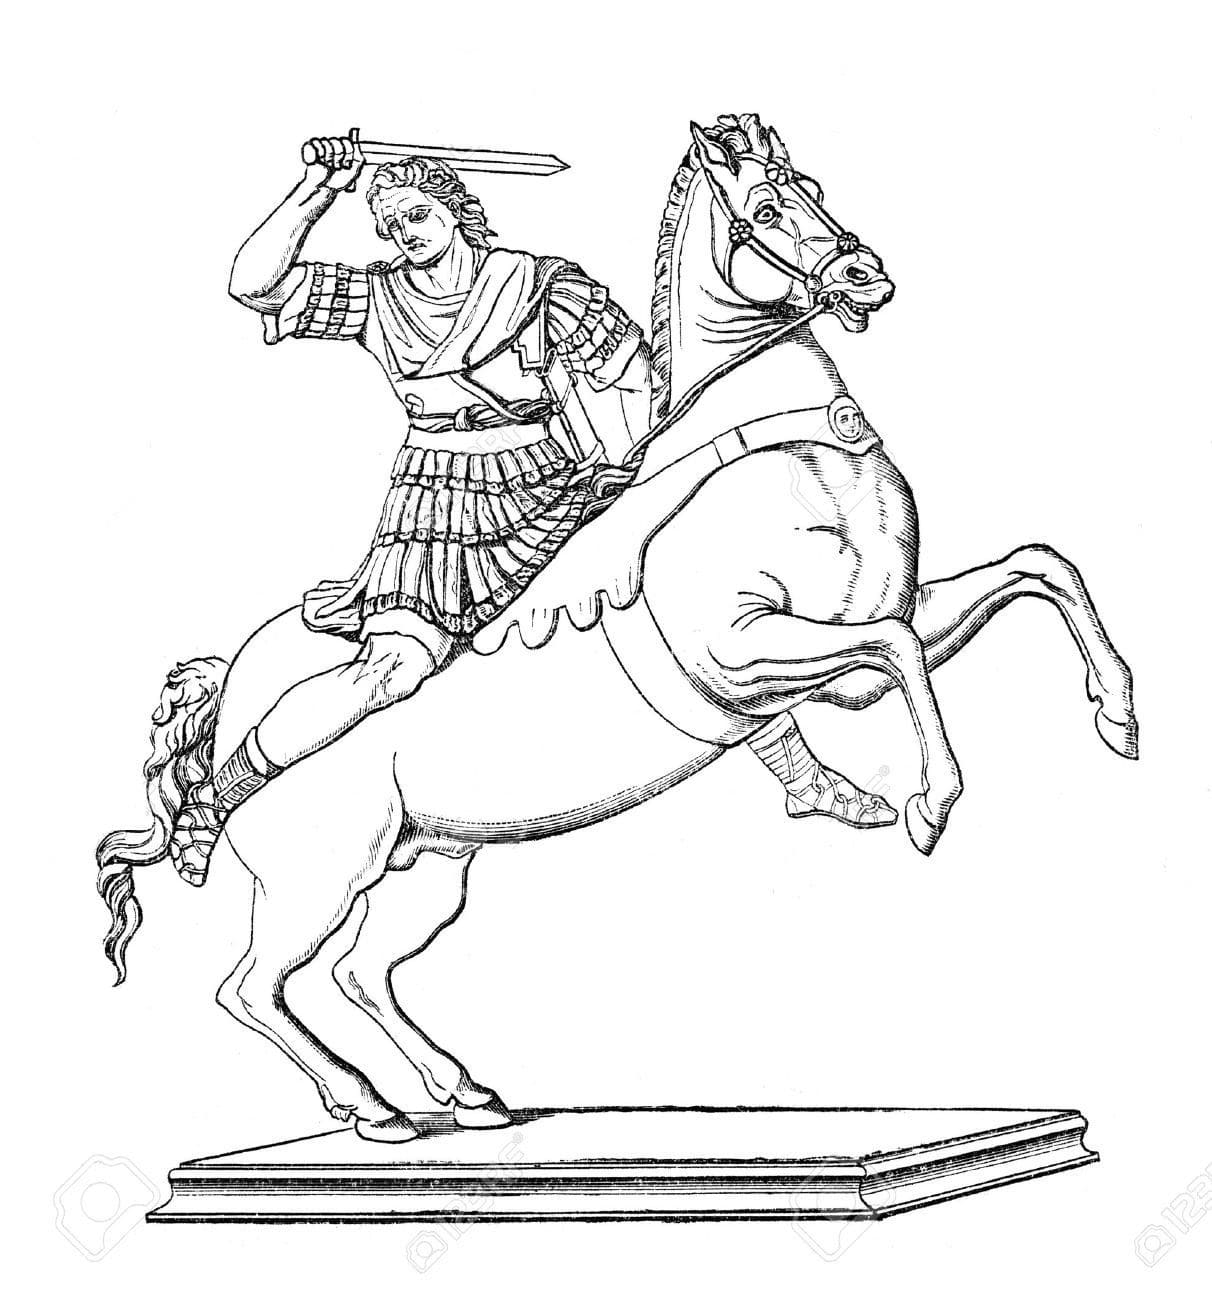 Alexander the Great coloring page - Download, Print or Color Online for ...